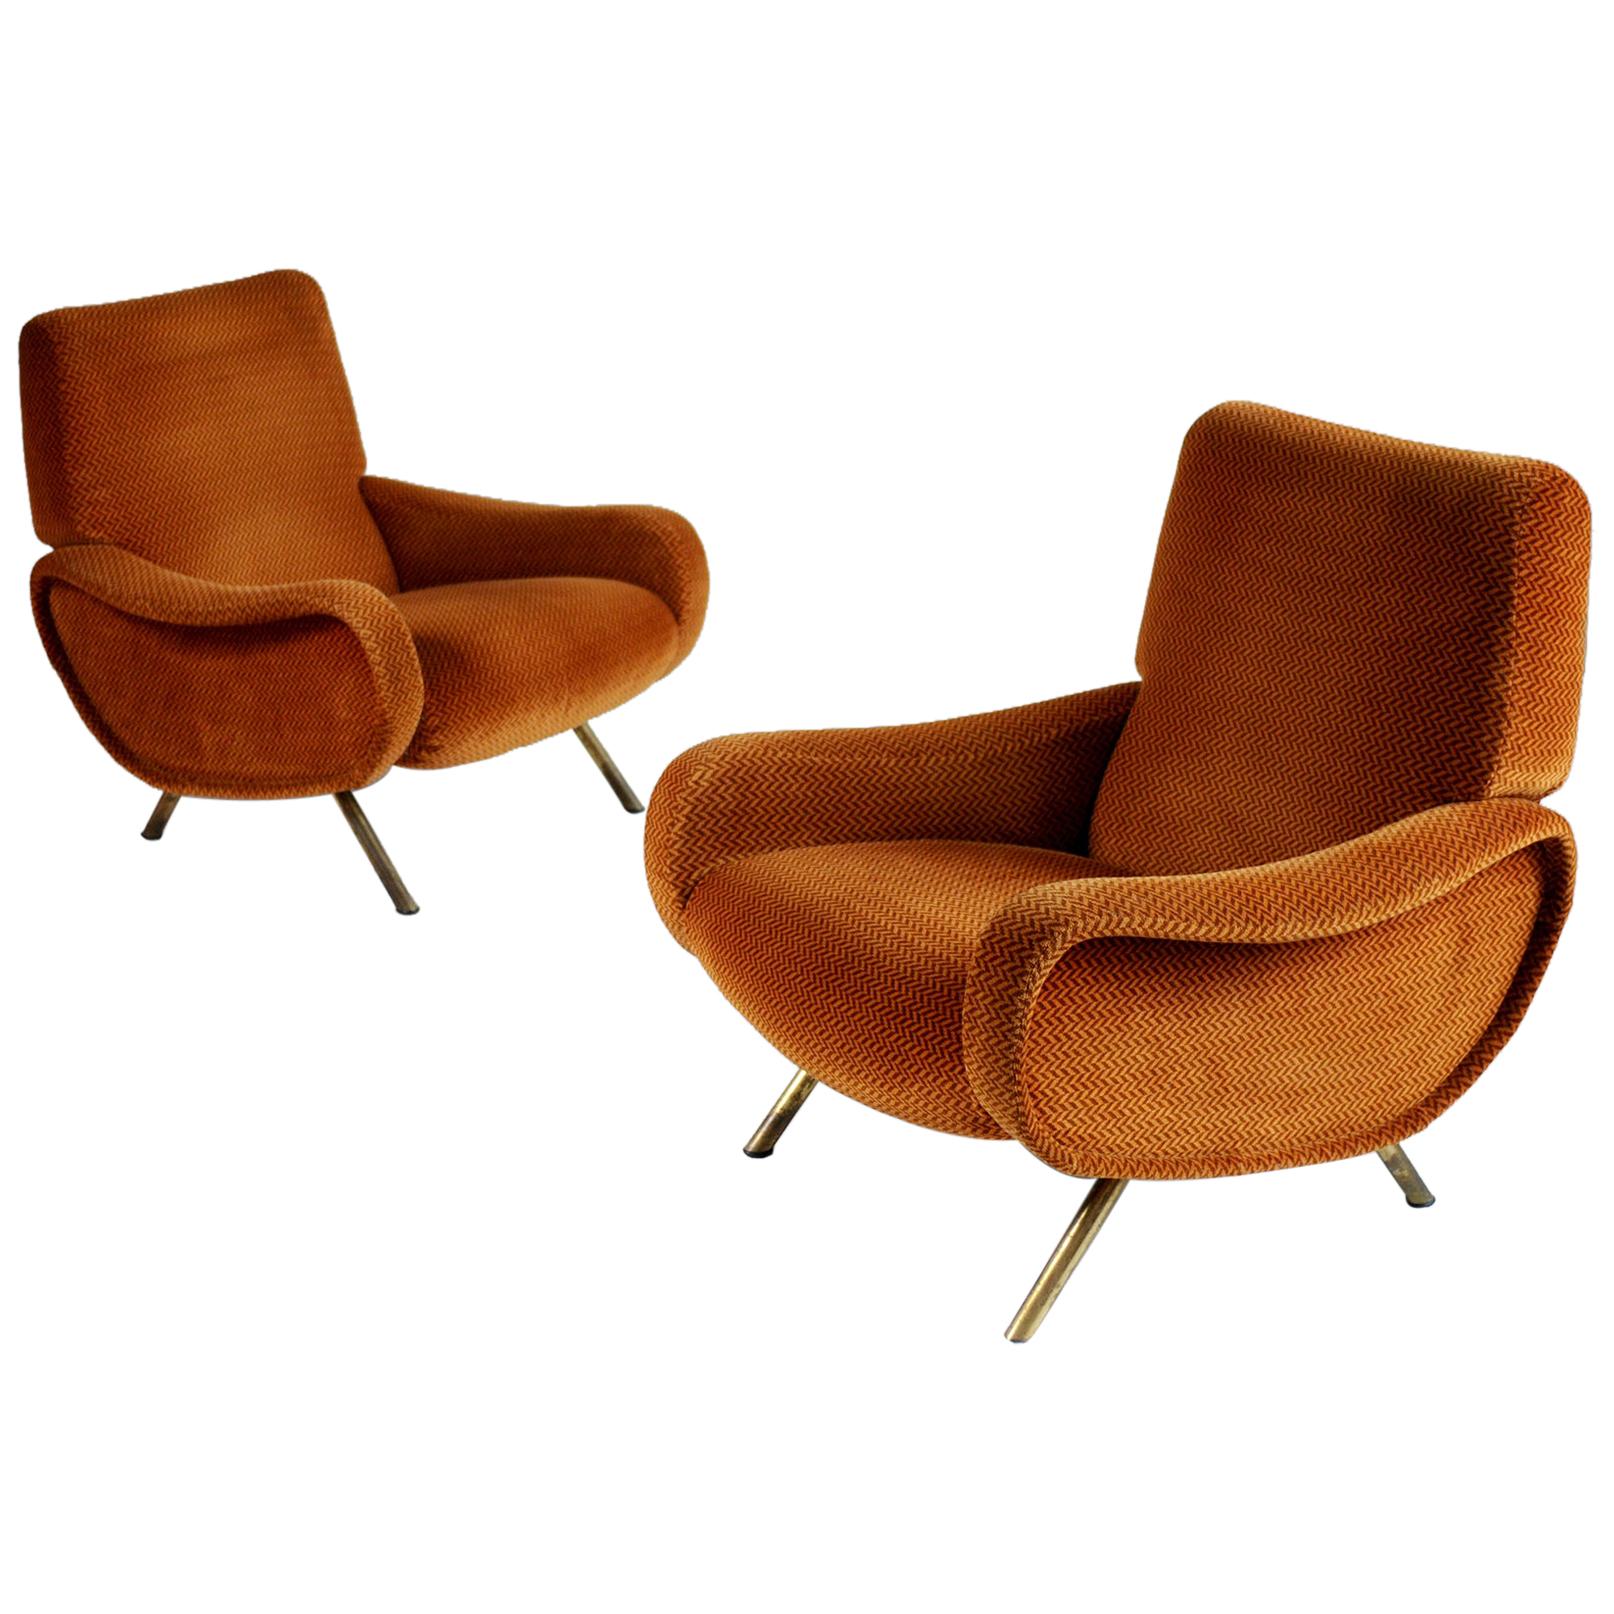 Marco Zanuso, Triennale Sofa and Pair of Lady Armchairs Set, Italy, 1950